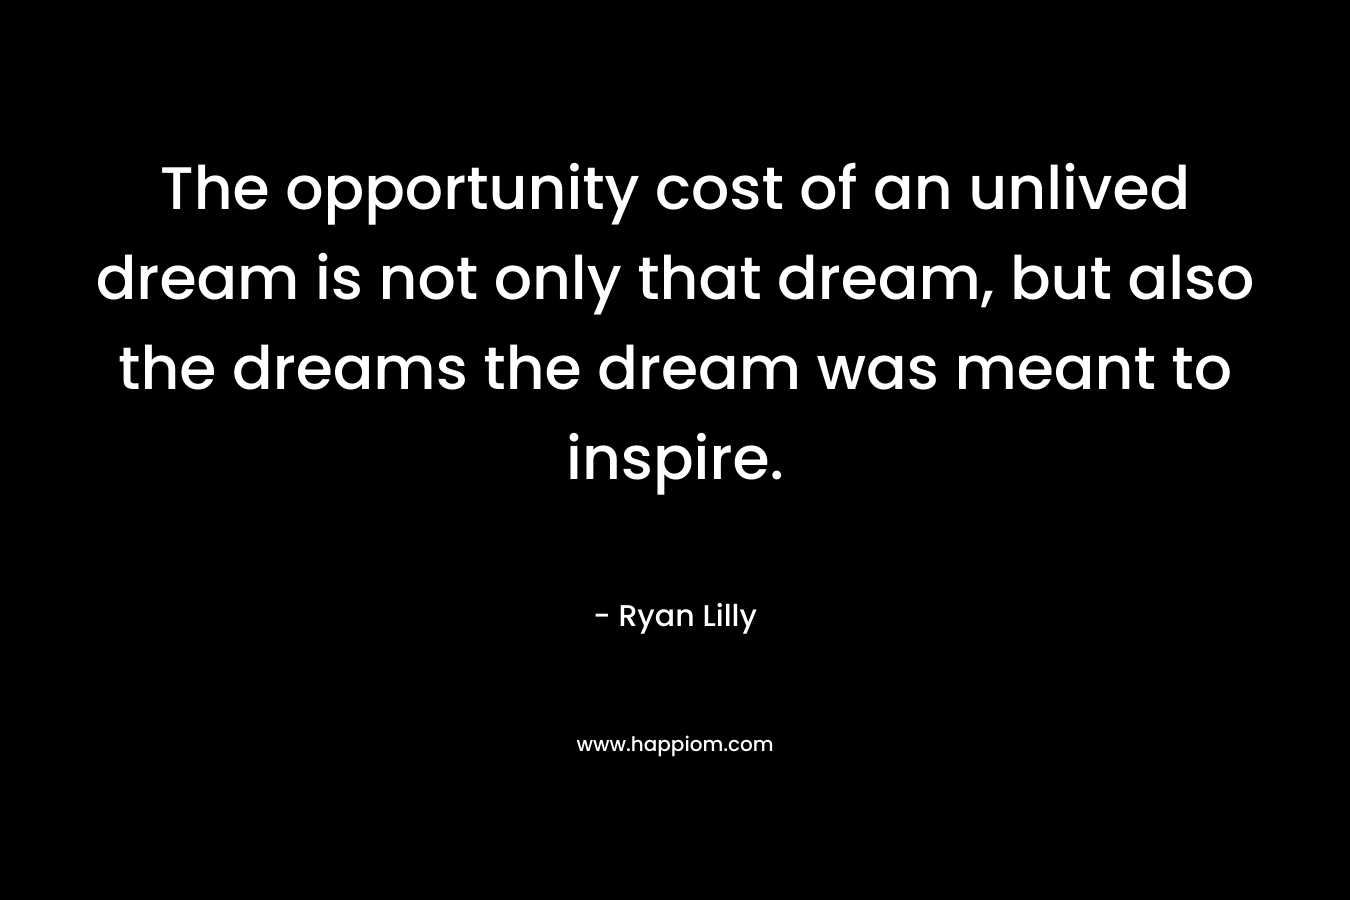 The opportunity cost of an unlived dream is not only that dream, but also the dreams the dream was meant to inspire.